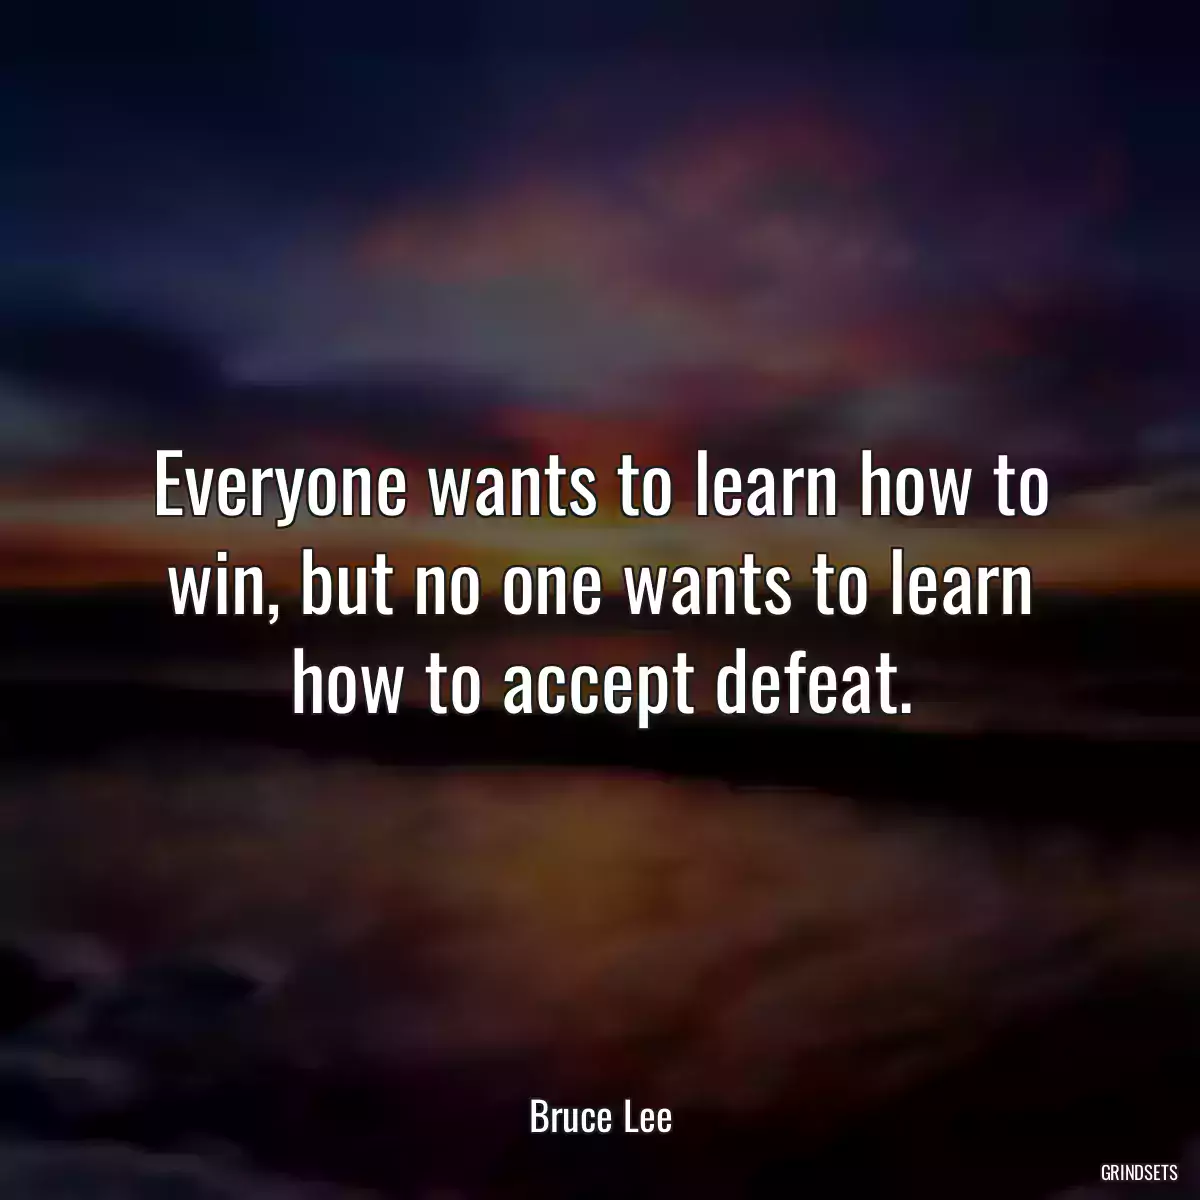 Everyone wants to learn how to win, but no one wants to learn how to accept defeat.